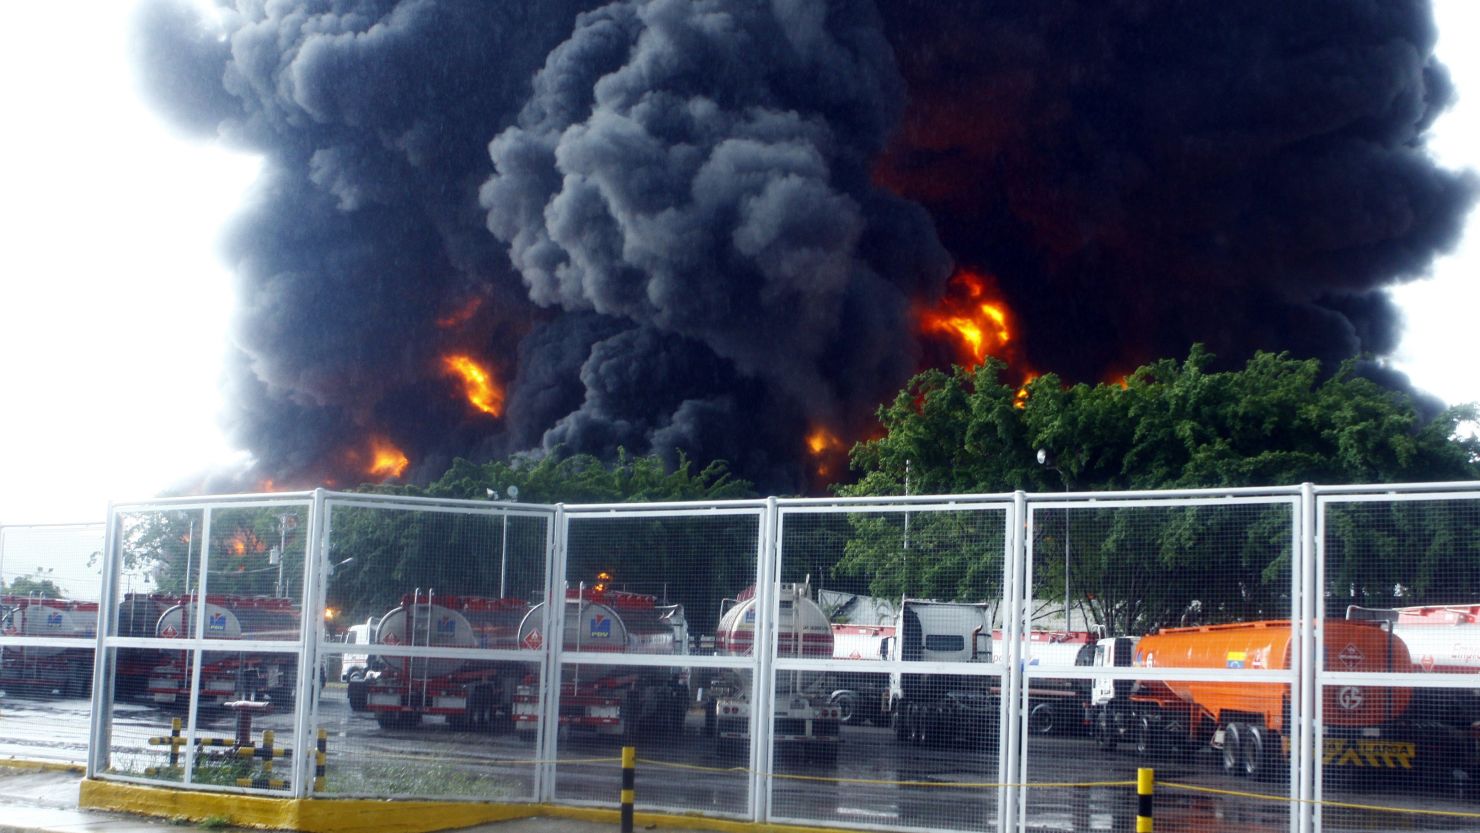 Partial view of the refinery of Guaraguao after a fire broke when a lightning struck a treatment pond, August 11, 2013.